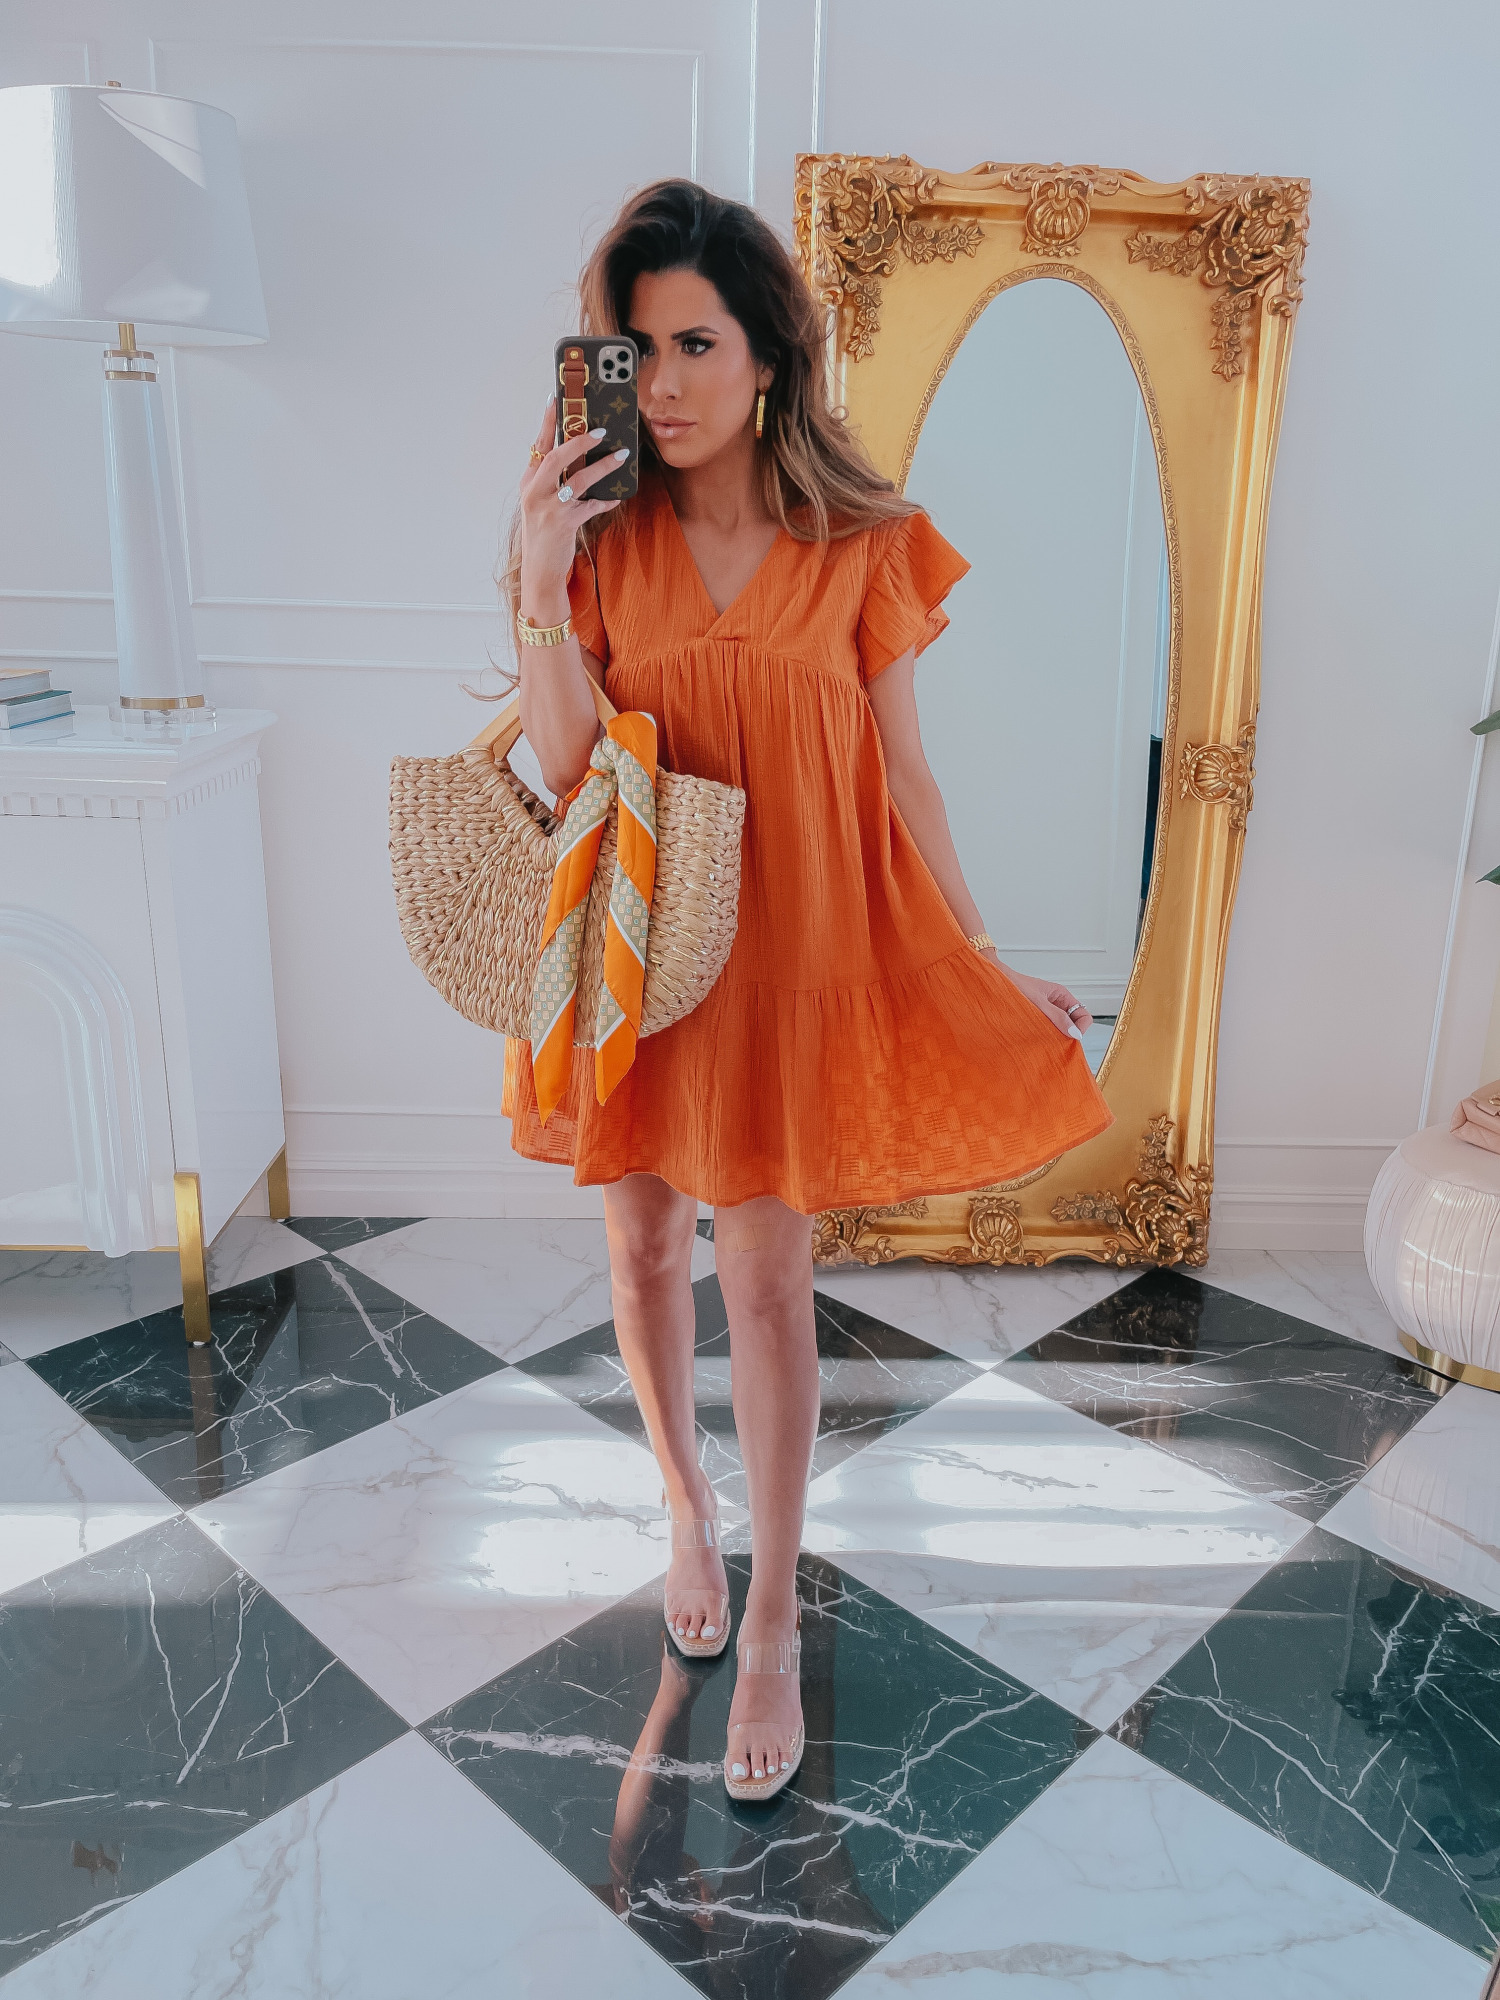 Casual Dress Spring 2021, Orange Dress, Flattering Dress, Flattering Wedges, Clear Wedges, Straw Beach Bag, Emily Gemma |Spring Fashion by popular US fashion blog, The Sweetest Thing: image of Emily Gemma wearing a Red Dress flutter sleeve orange baby doll dress and clear strap espadrilles. 